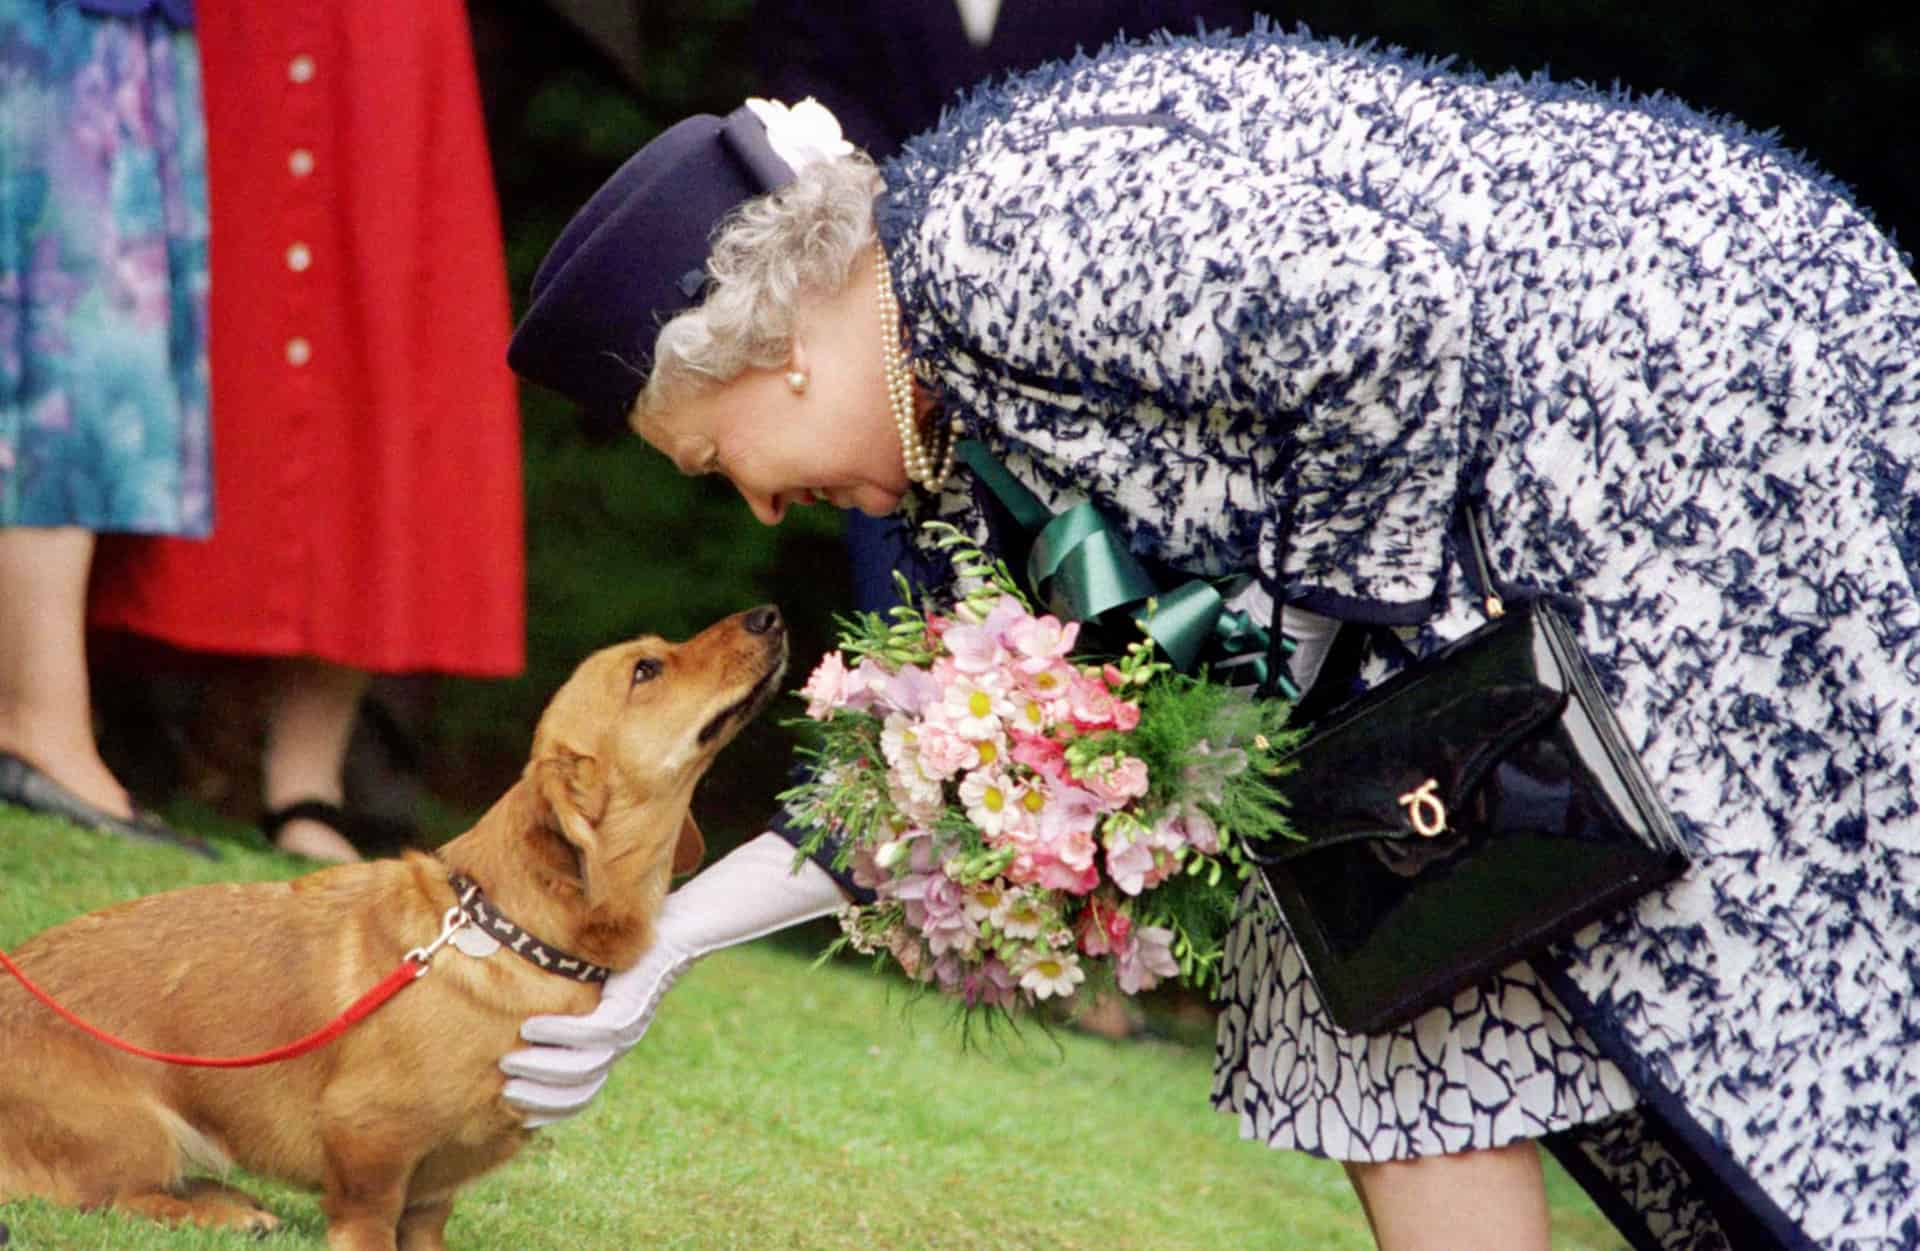 The Queen encountered an old acquaintance during a visit to the Roman site of Vindolanda near Hadrian's Wall in Northumberland, a corgi bred by the Queen and now owned by Lady Beaumont who lives in the area.